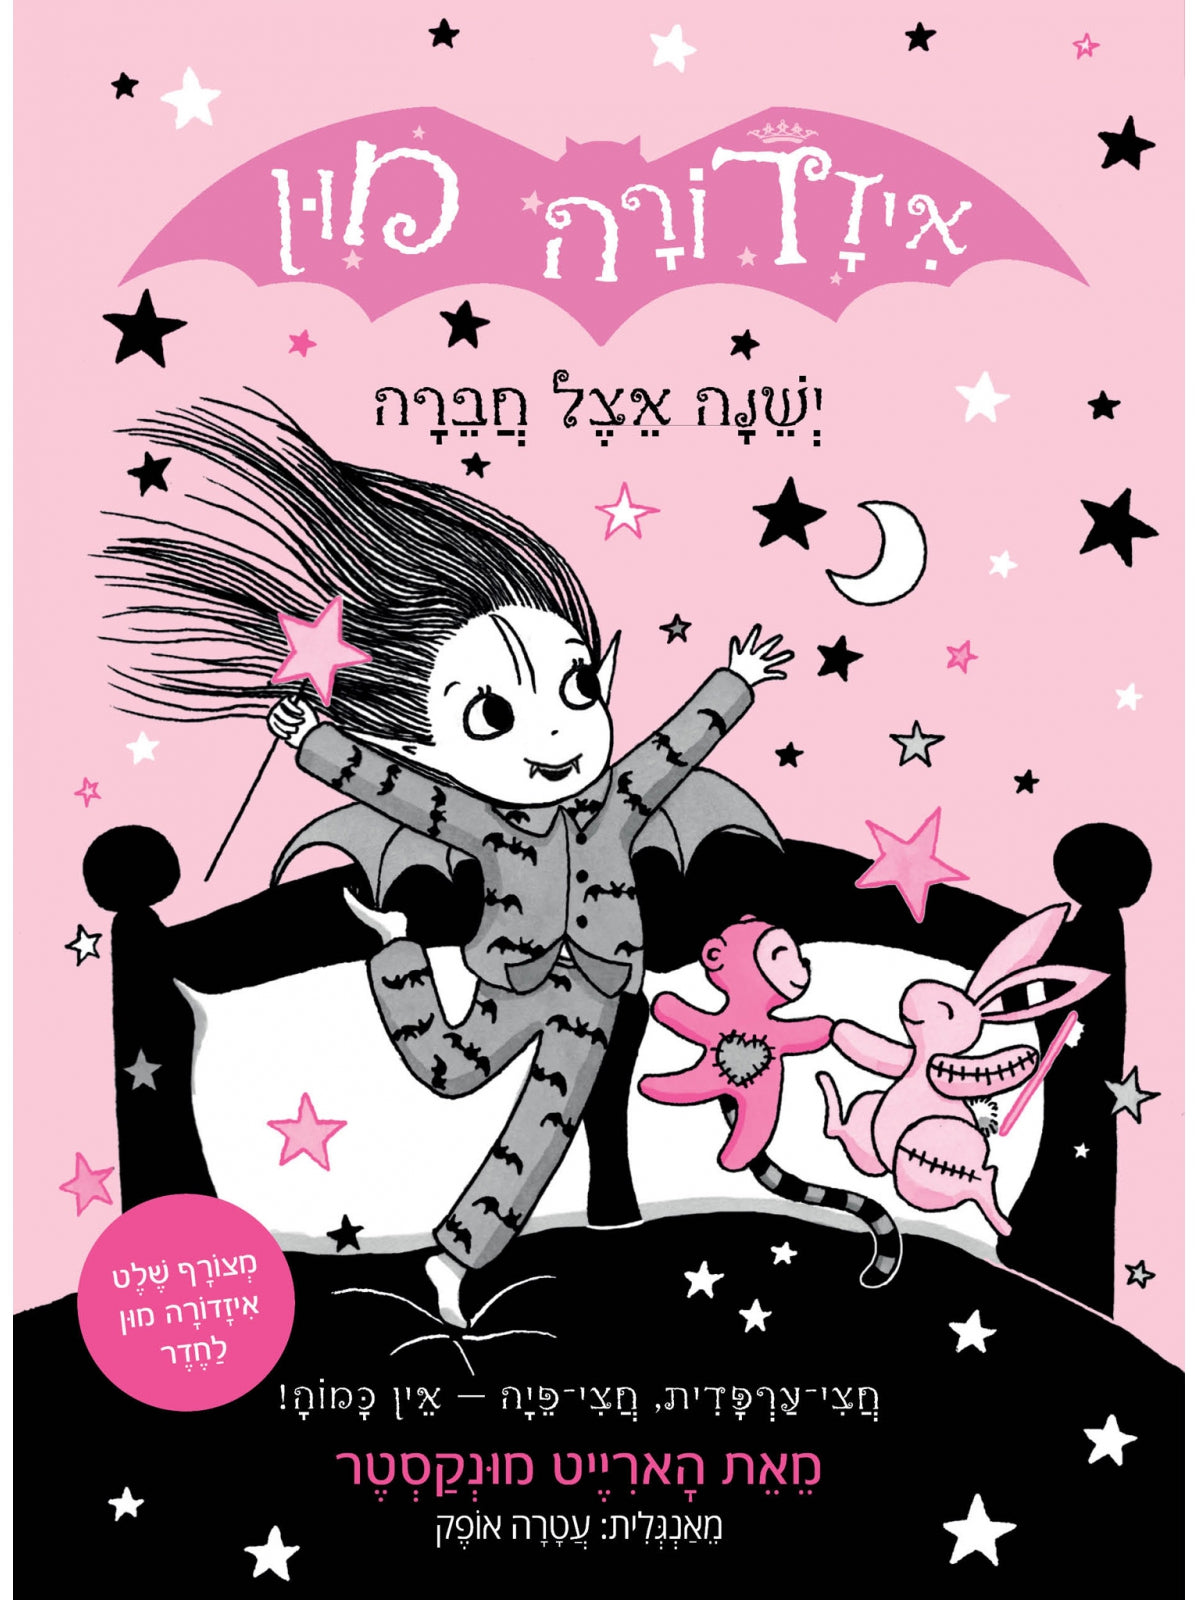 ISADORA MOON 9 IS SLEEPING WITH A FRIEND